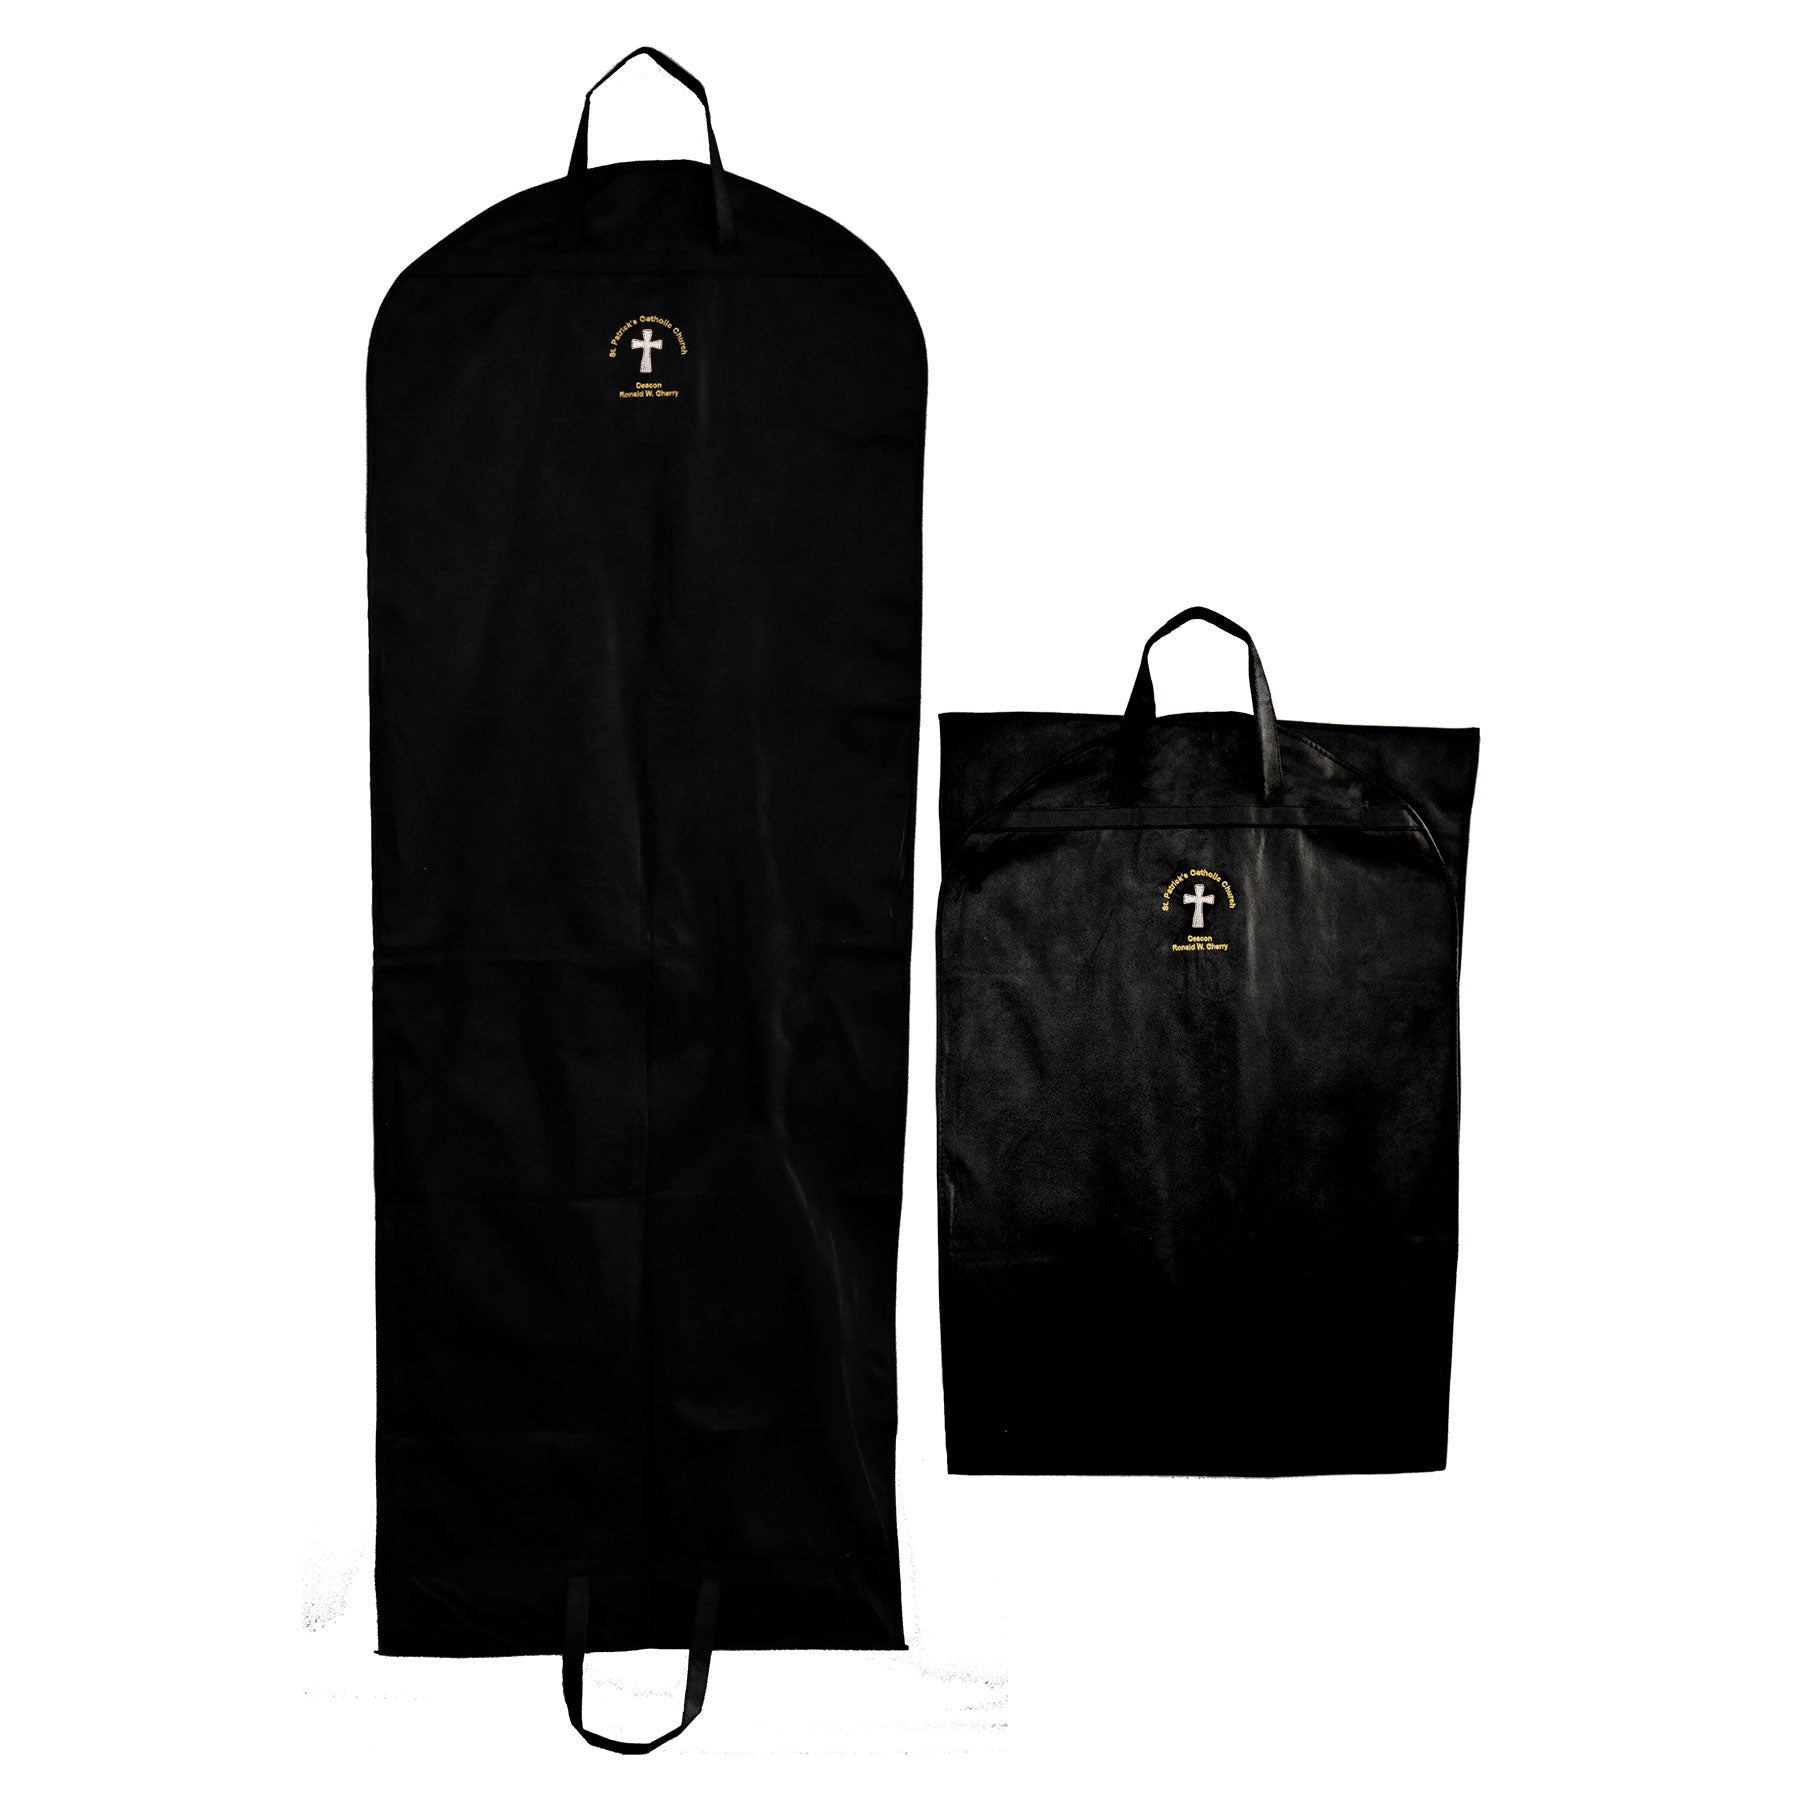 Clergy Garment Bag with Personalized Monogramming